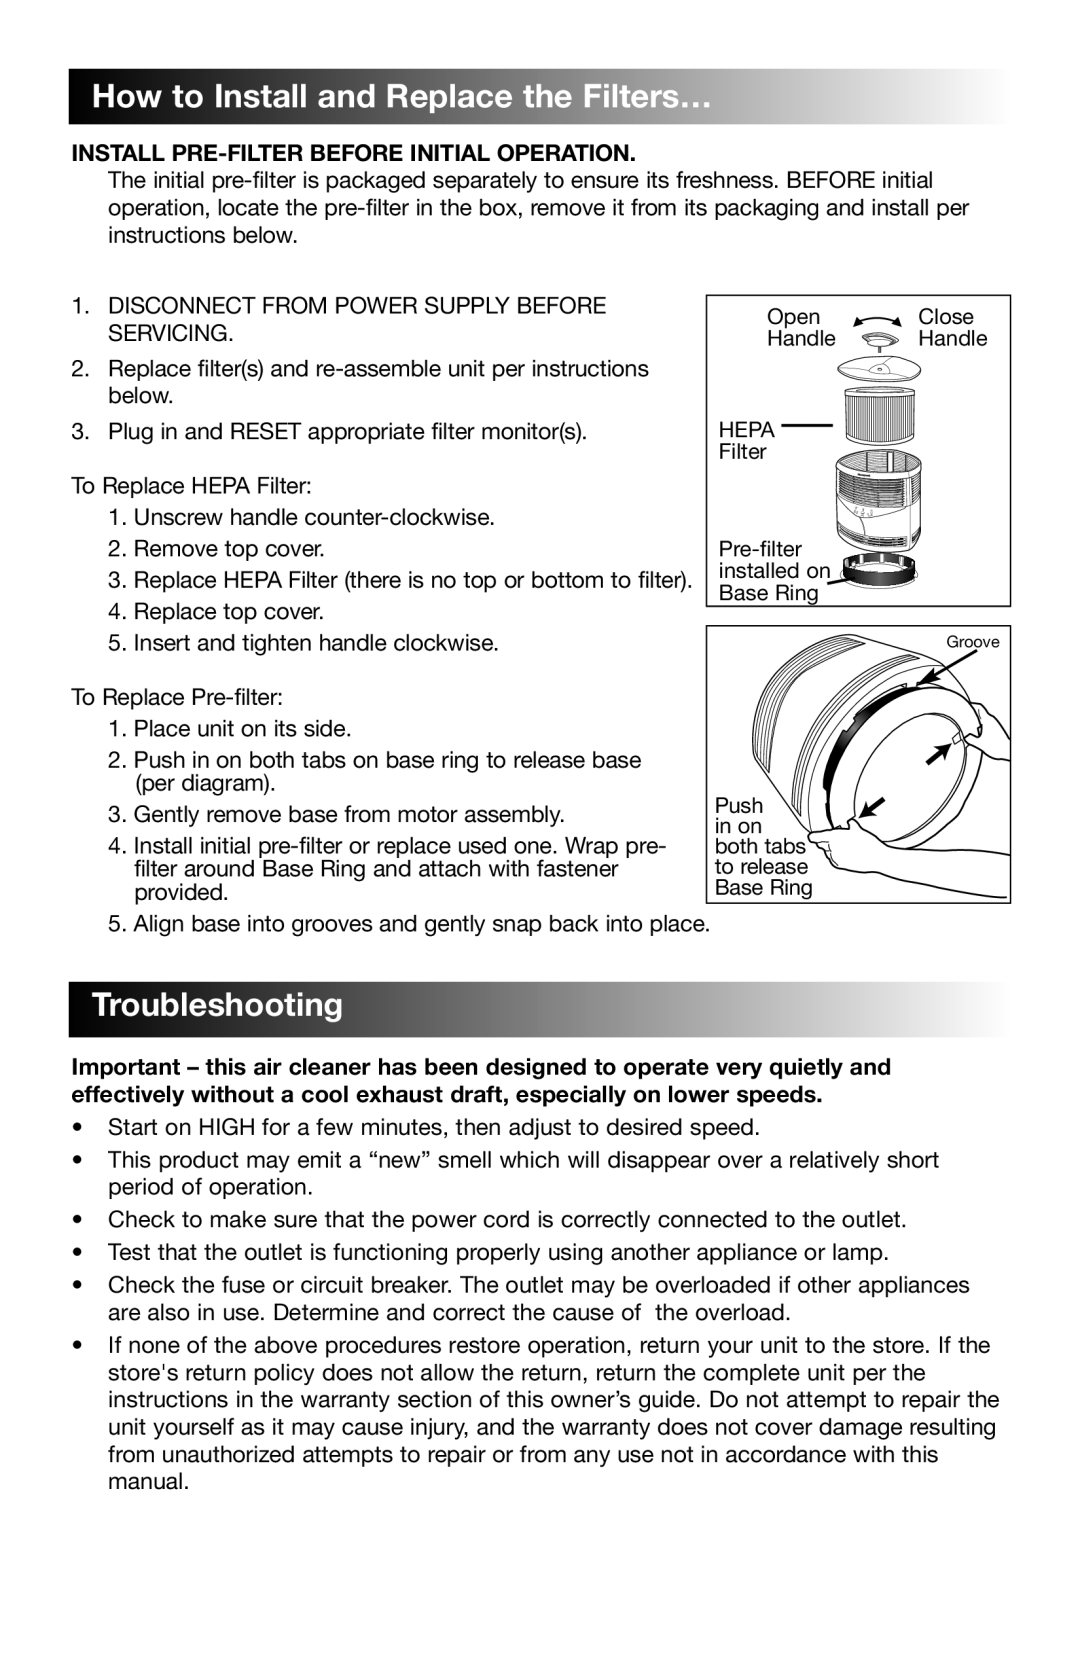 Honeywell 18150 owner manual HowtoInstallandReplacetheFilters…, Troubleshooting, Install Pre-Filterbefore Initial Operation 